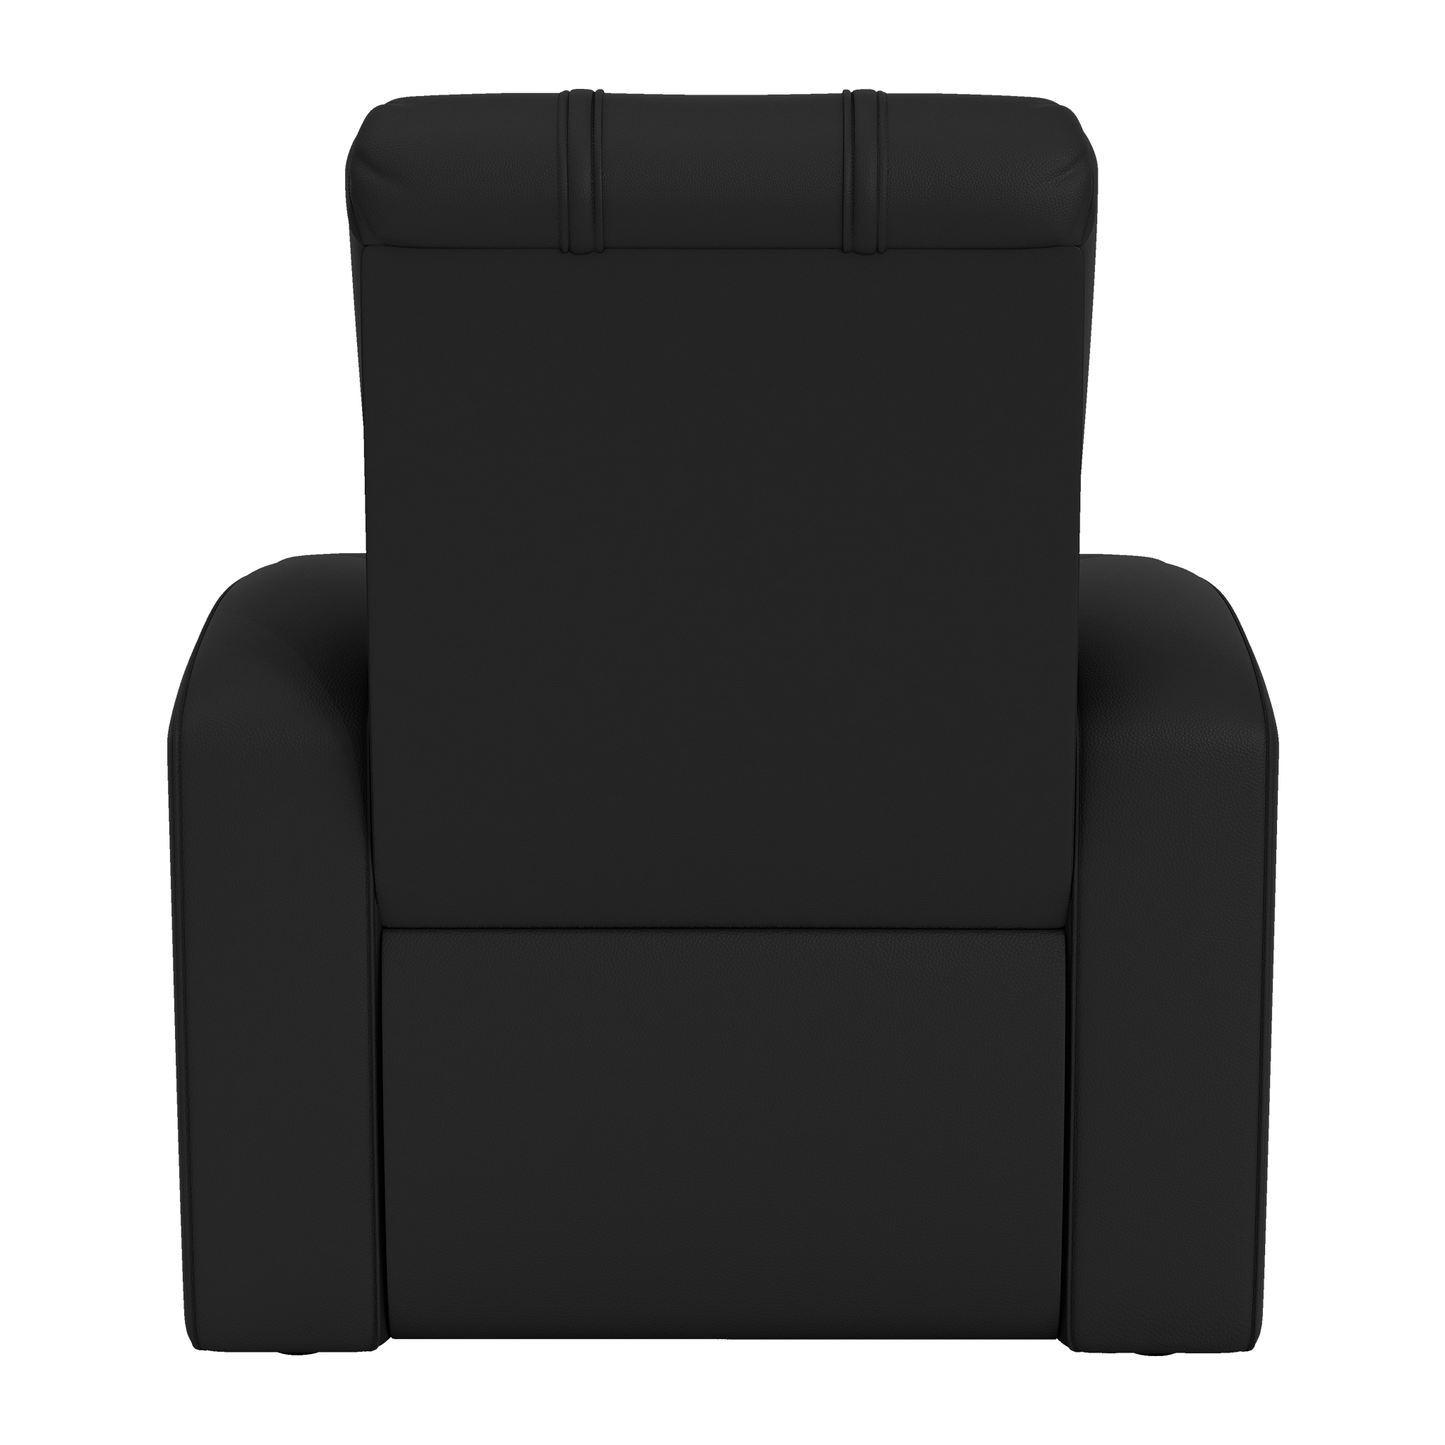 Relax Home Theater Recliner with New England Patriots Classic Logo